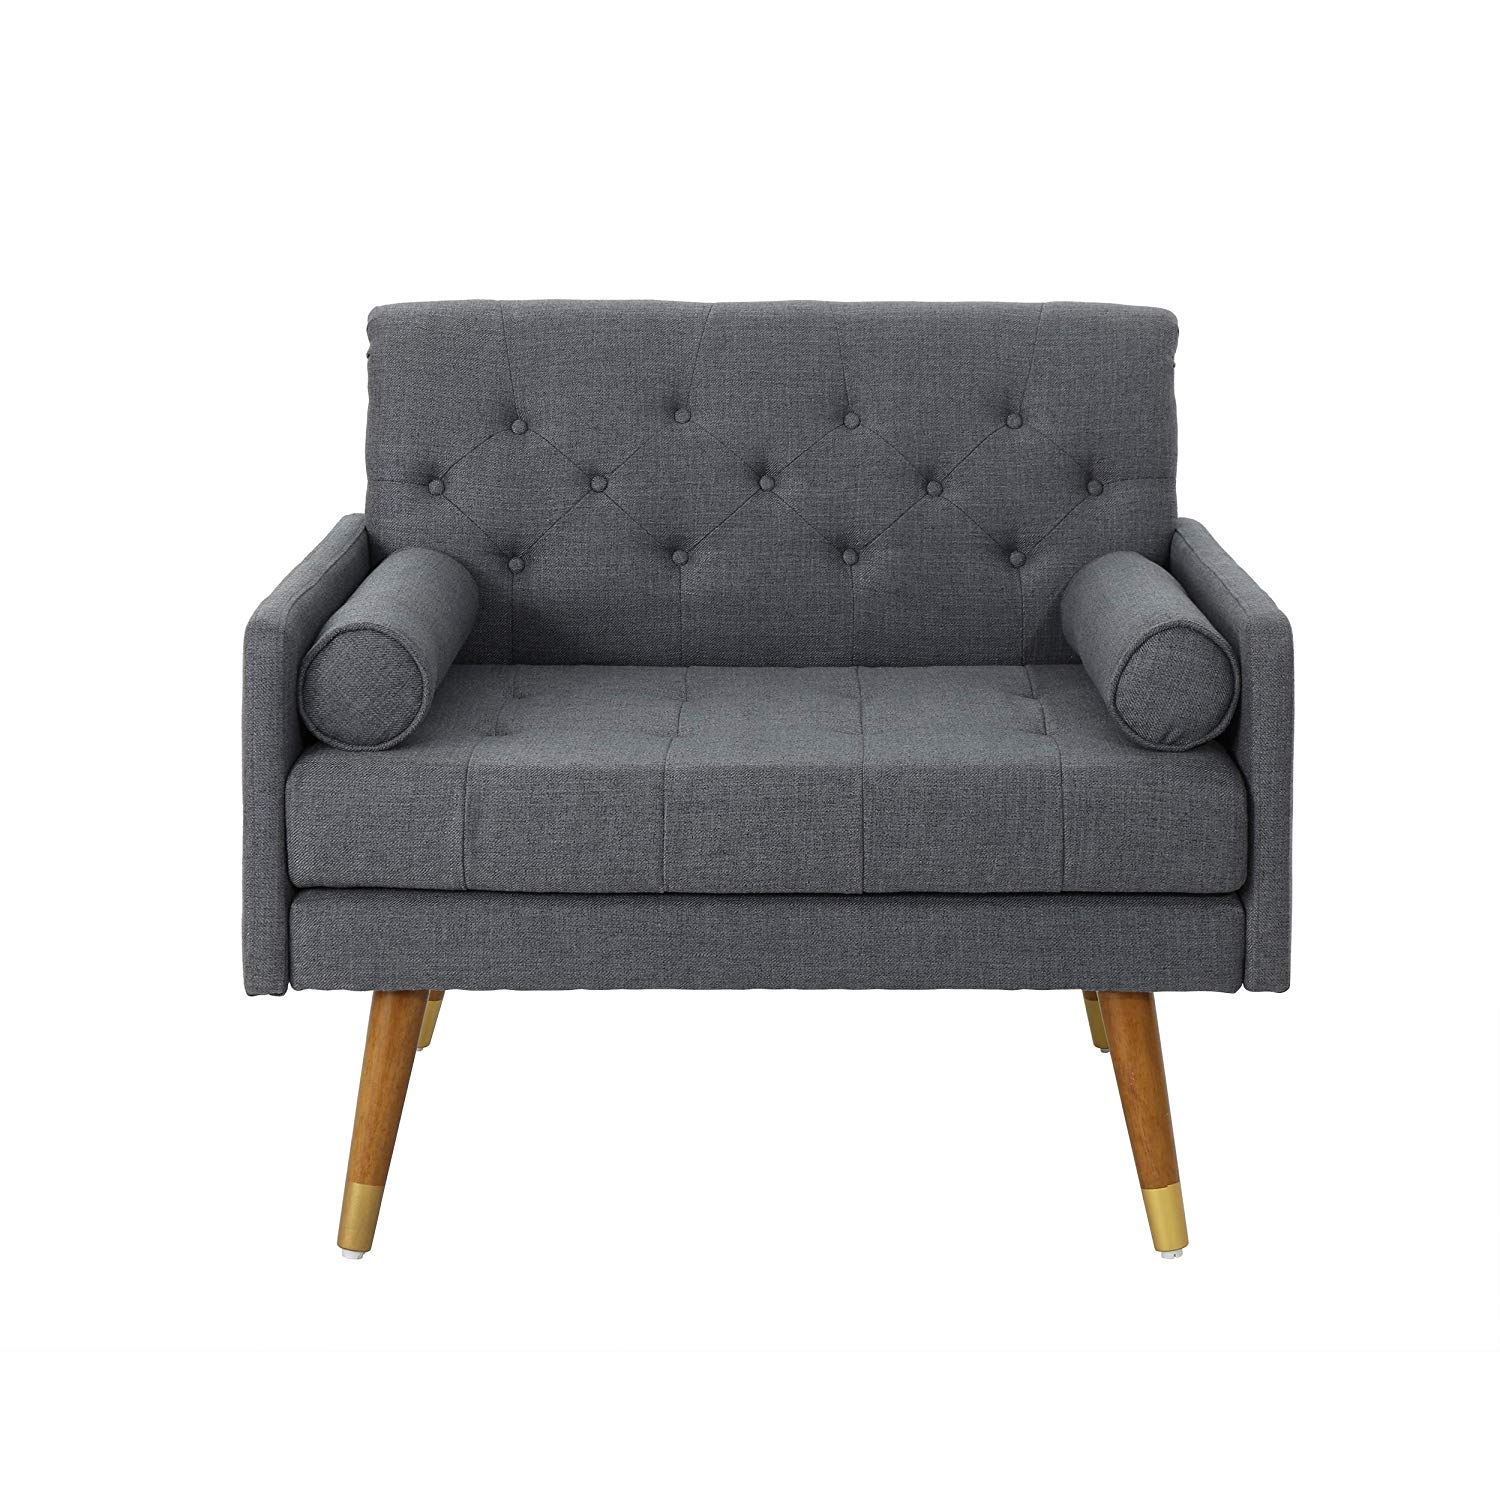 gray modern love seat with wooden legs